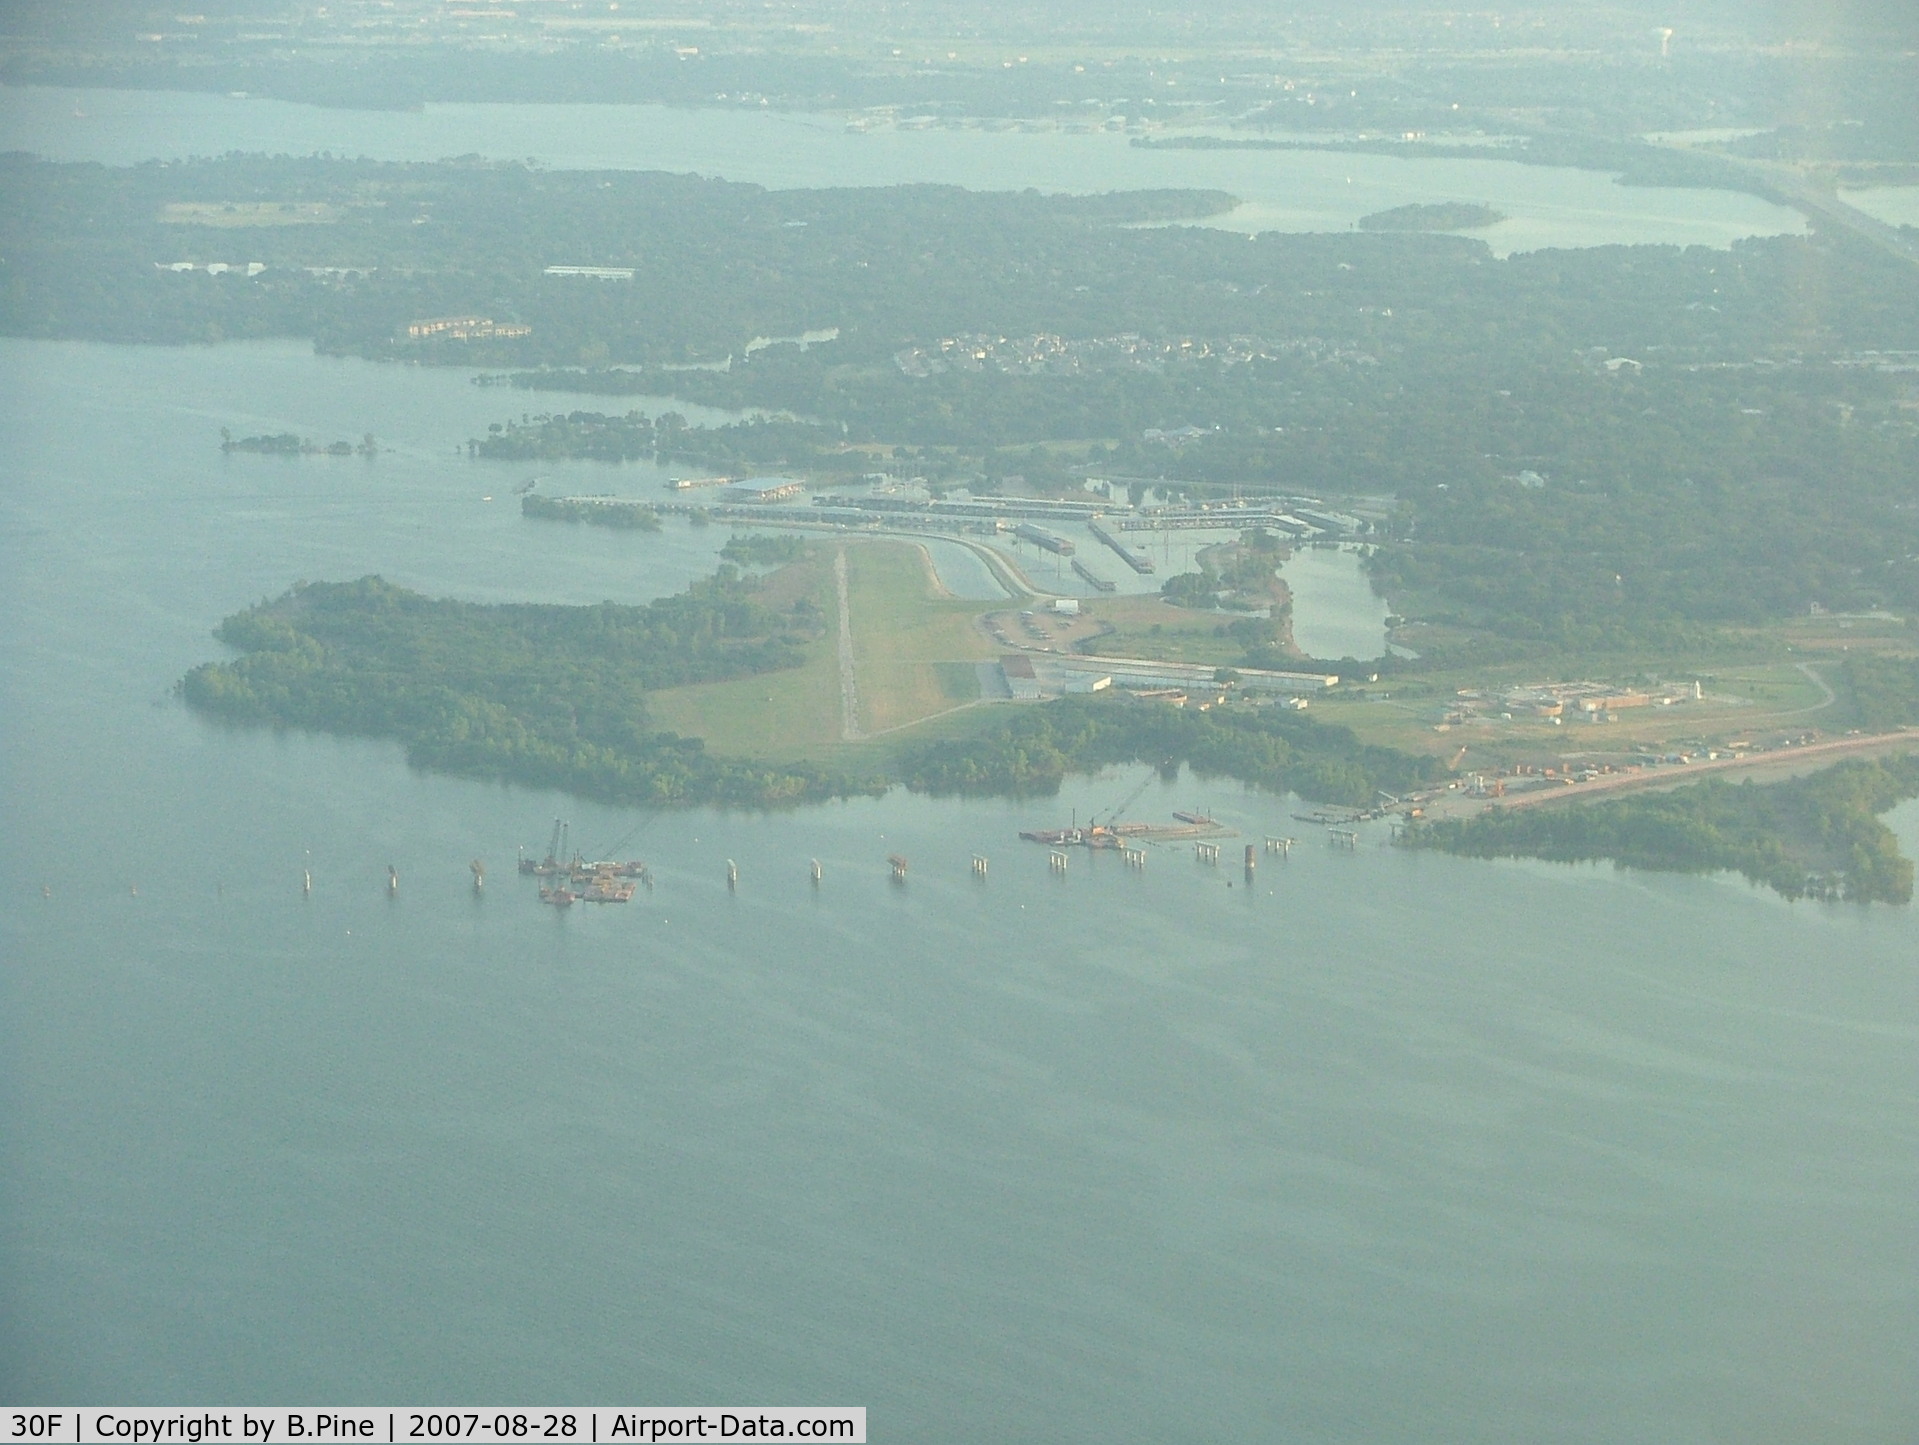 Lakeview Airport (30F) - Recent photo looking south (notice the toll-bridge UC)